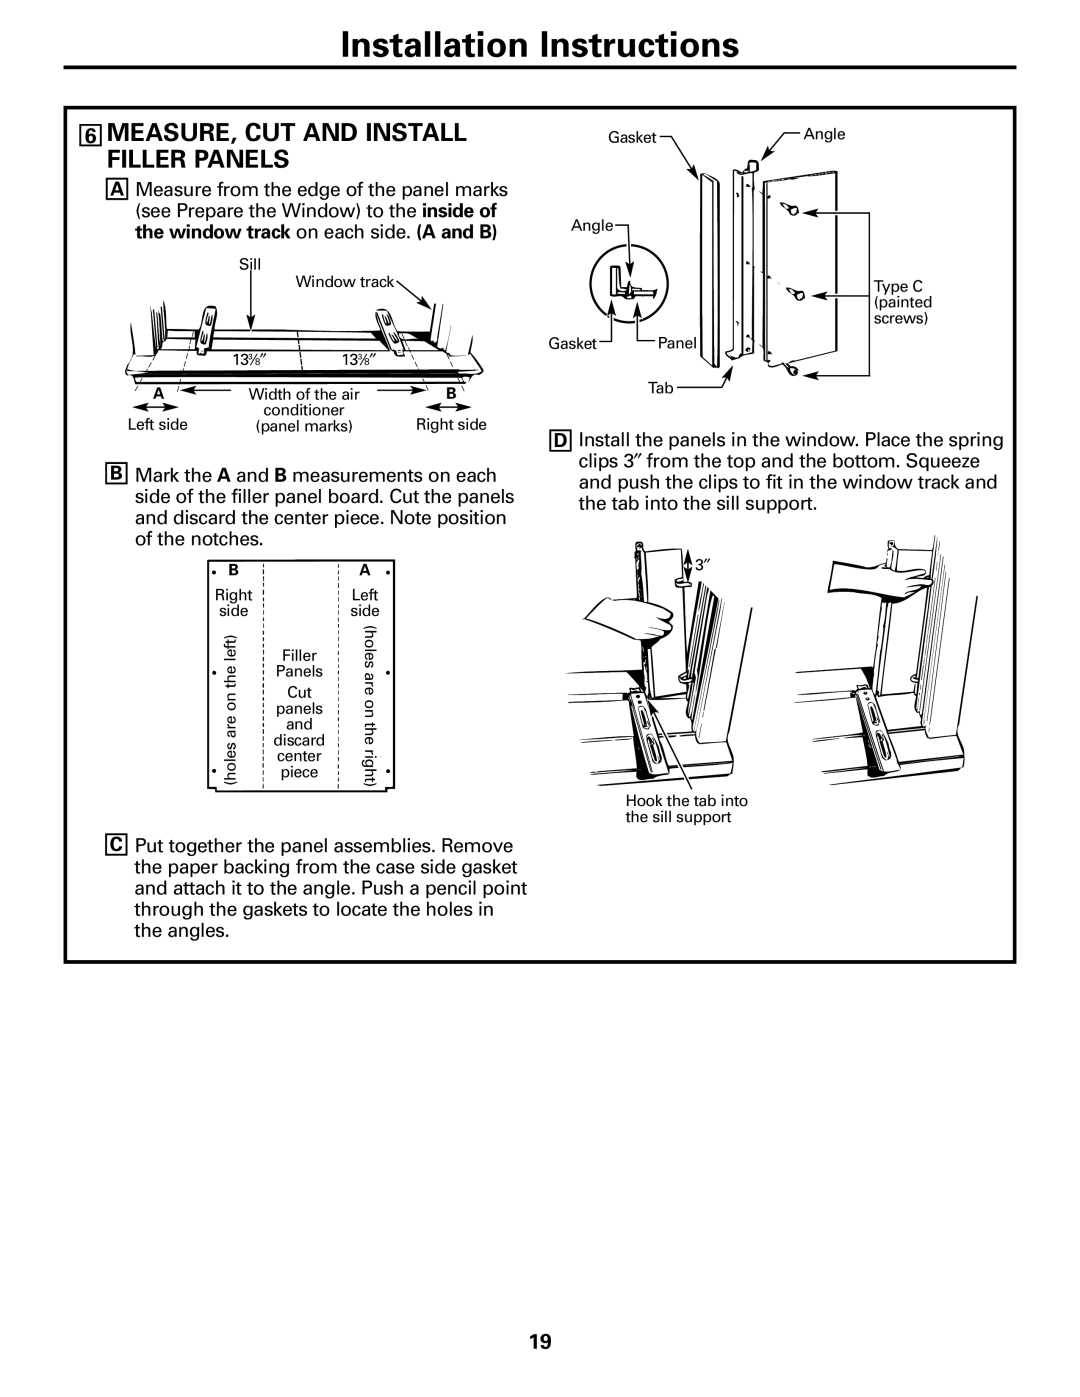 GE AJHS10DCC installation instructions Installation Instructions, 6MEASURE, CUT AND INSTALL FILLER PANELS 